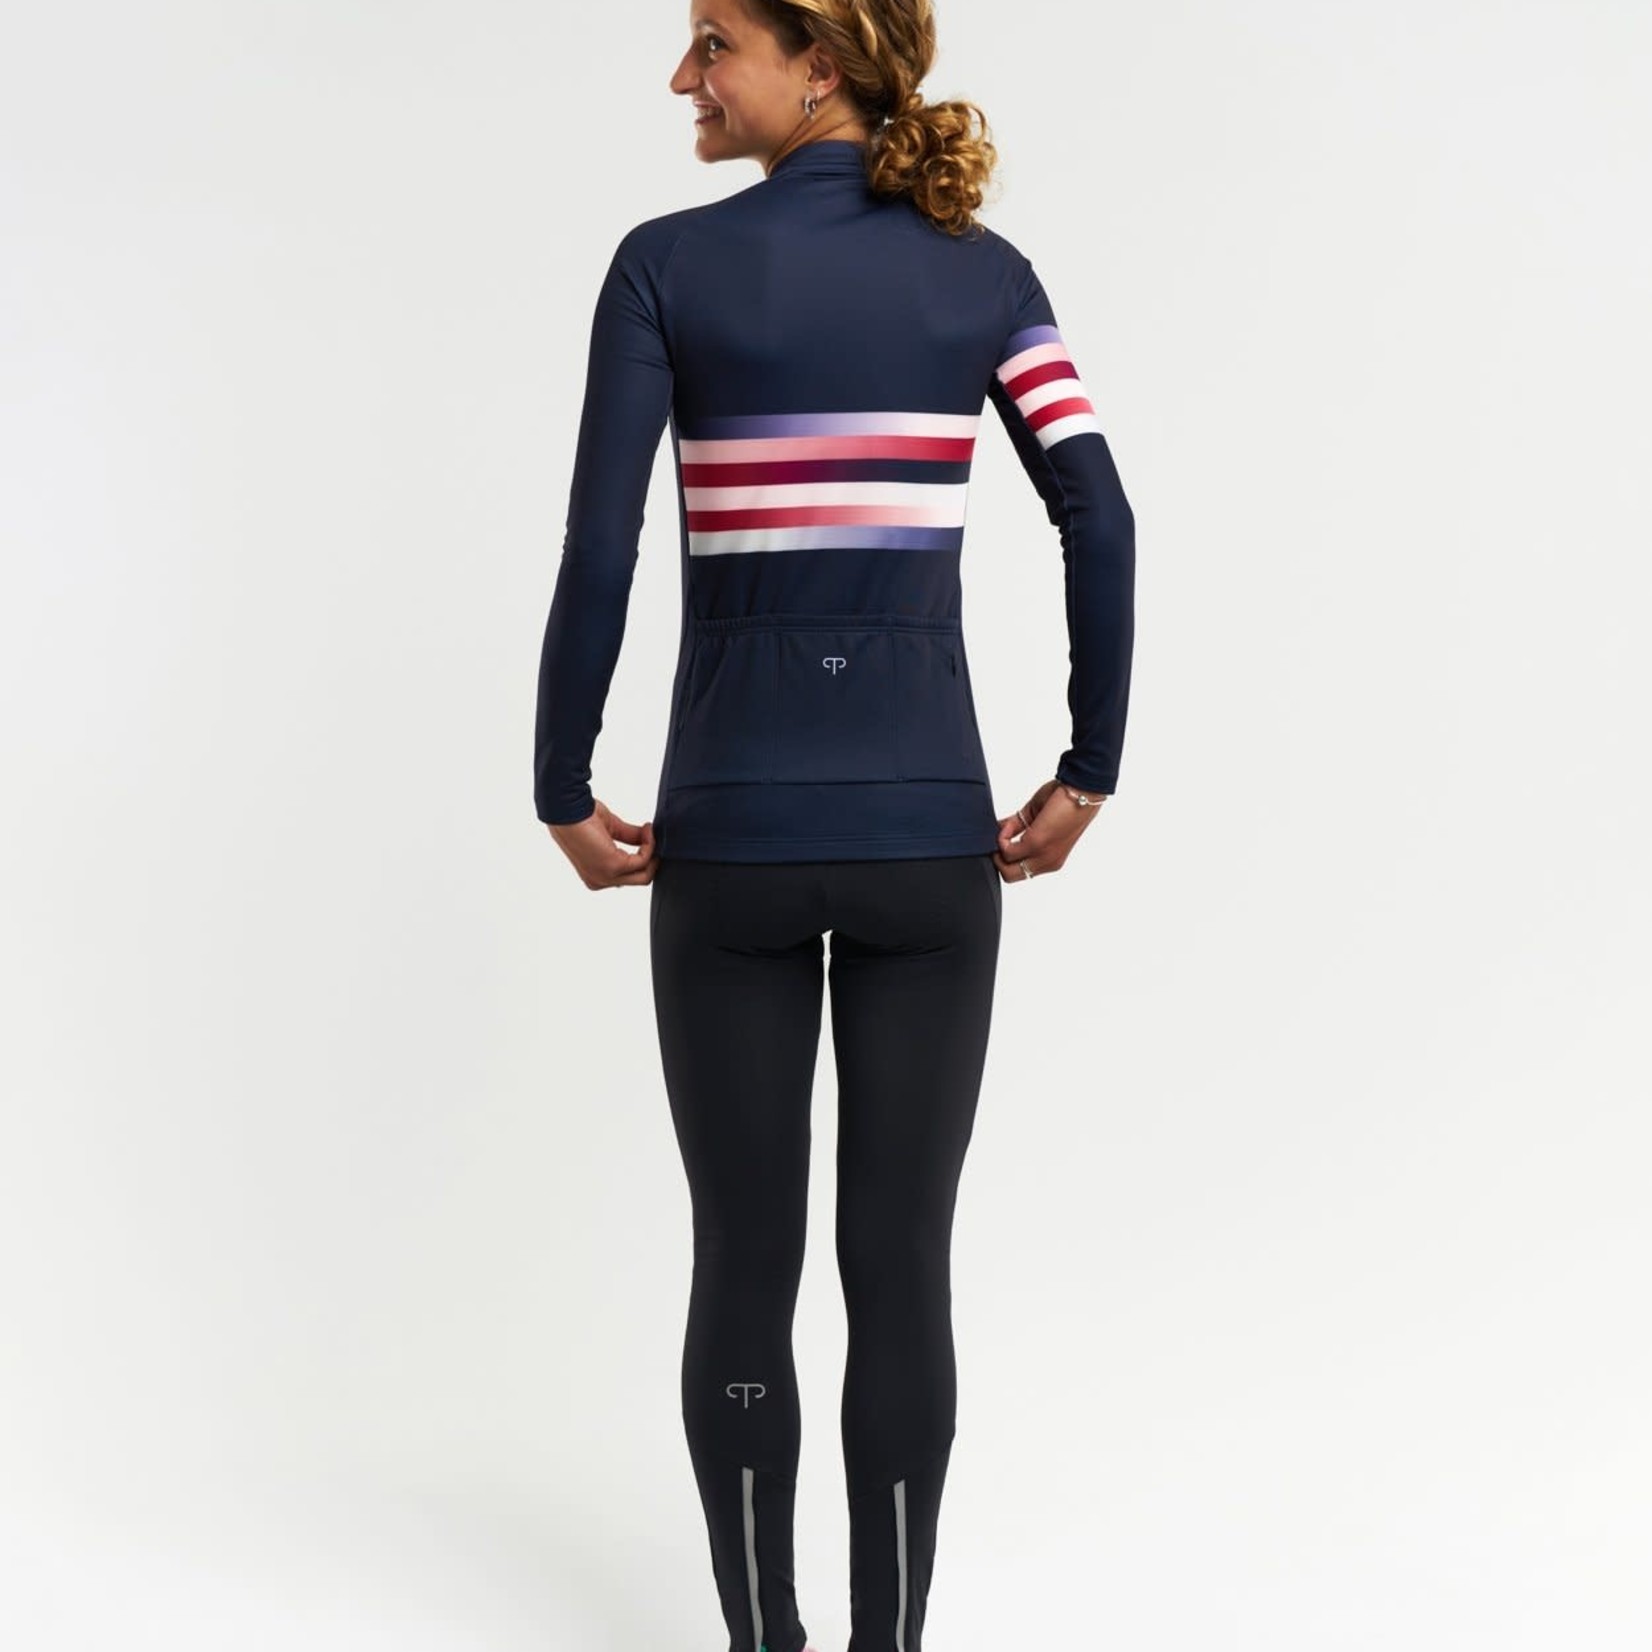 Peppermint '21, PEPPERMINT, Thermal Jersey, Mood Navy